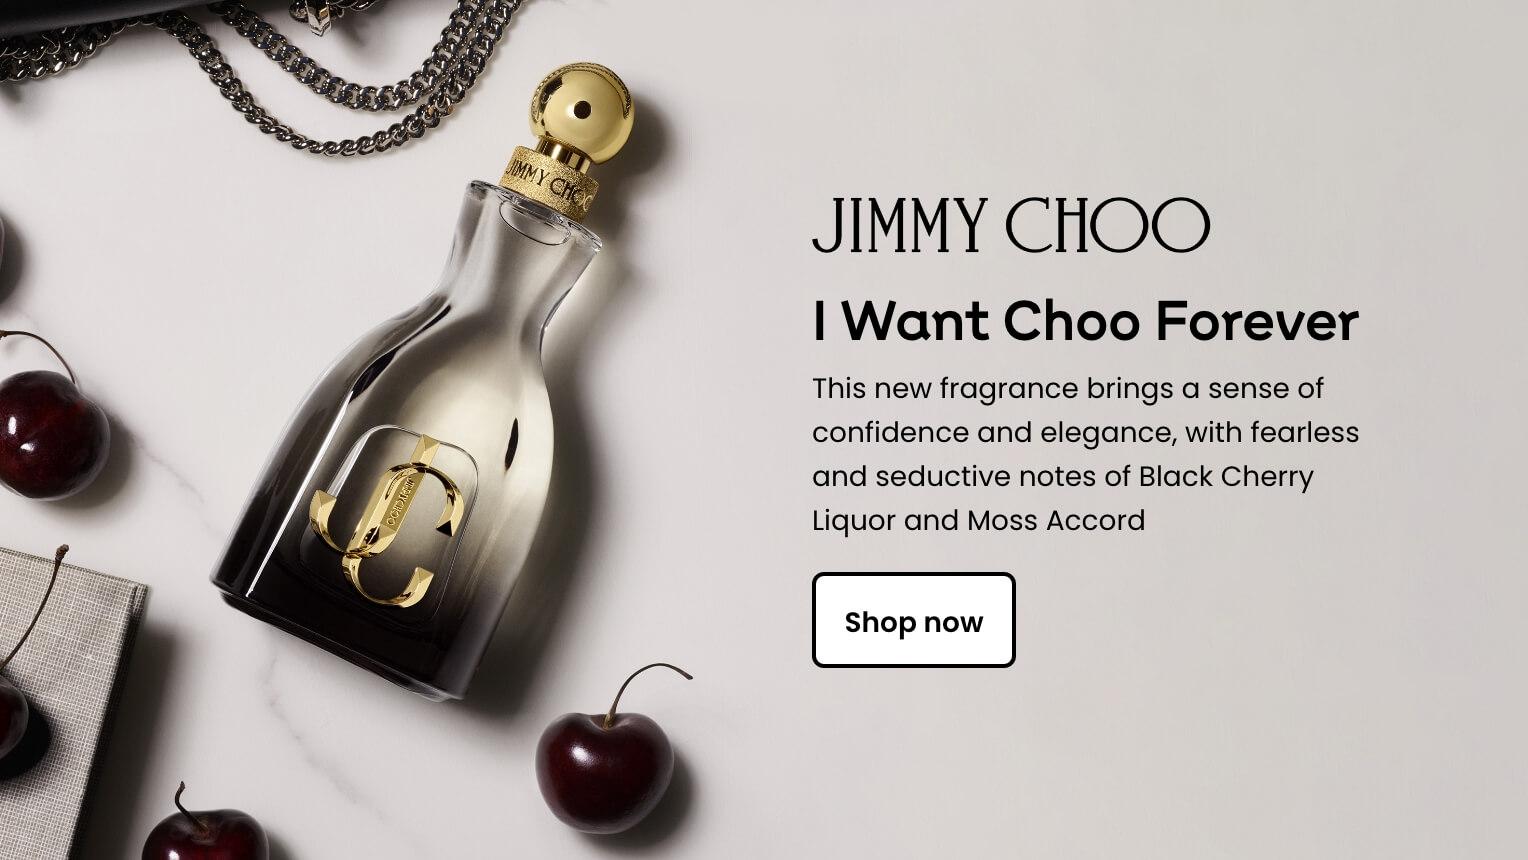 Jimmy Choo. I want Choo Forever. This new fragrance brings a sense of confidence and elegance, with fearless and seductive notes of Black Cherry Liquor and Moss Accord. Shop now.